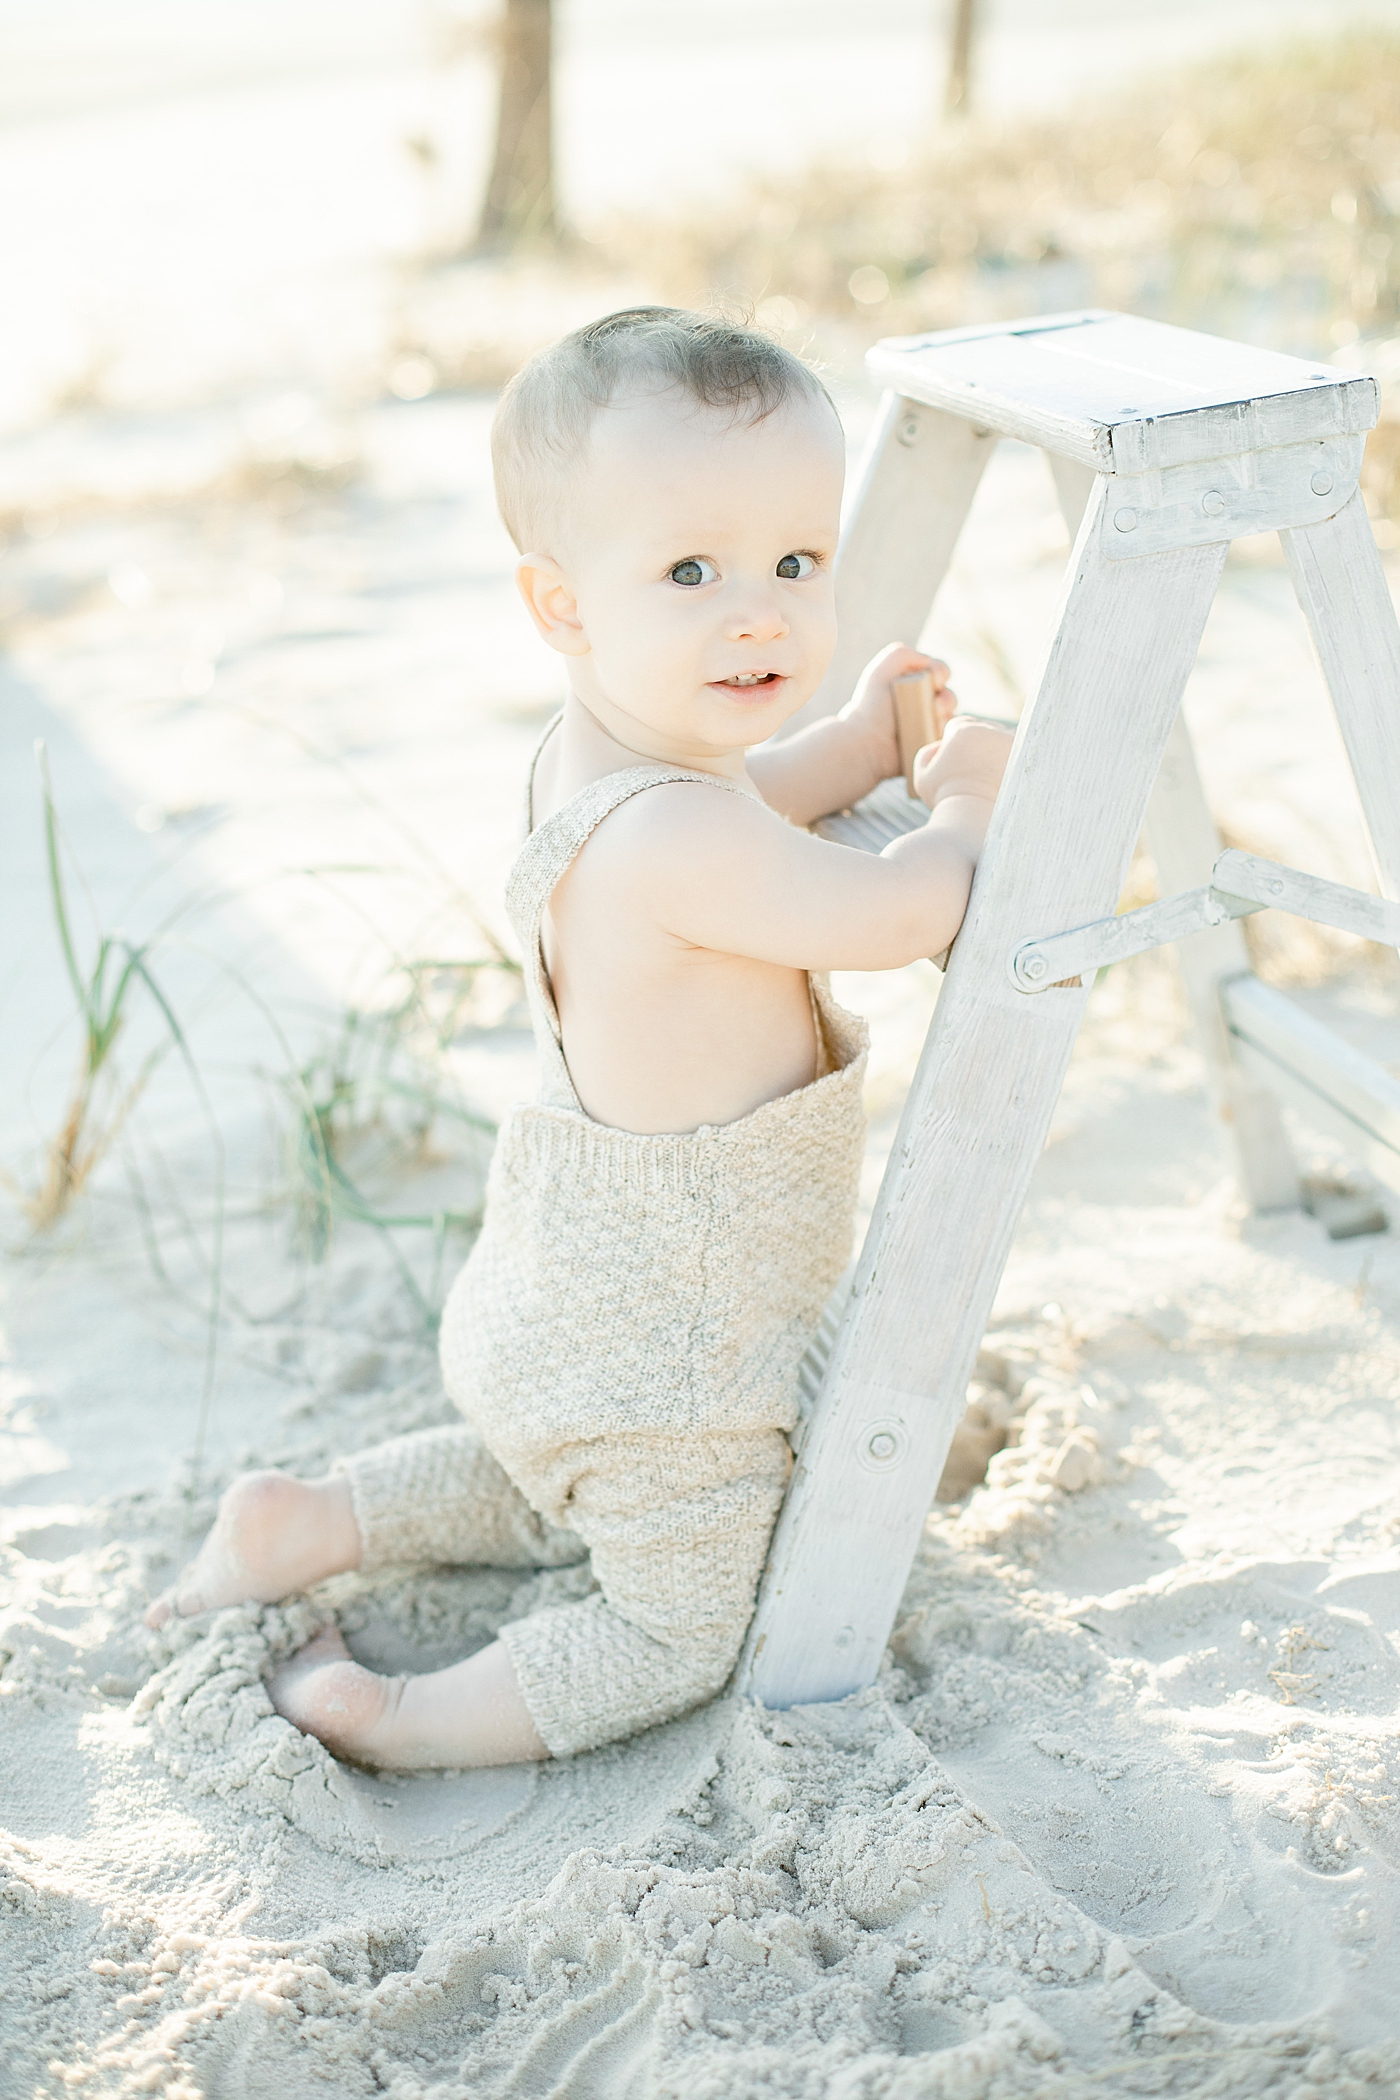 Baby boy practicing standing on the beach | Photo by Ocean Springs Family Photographer Little Sunshine Photography